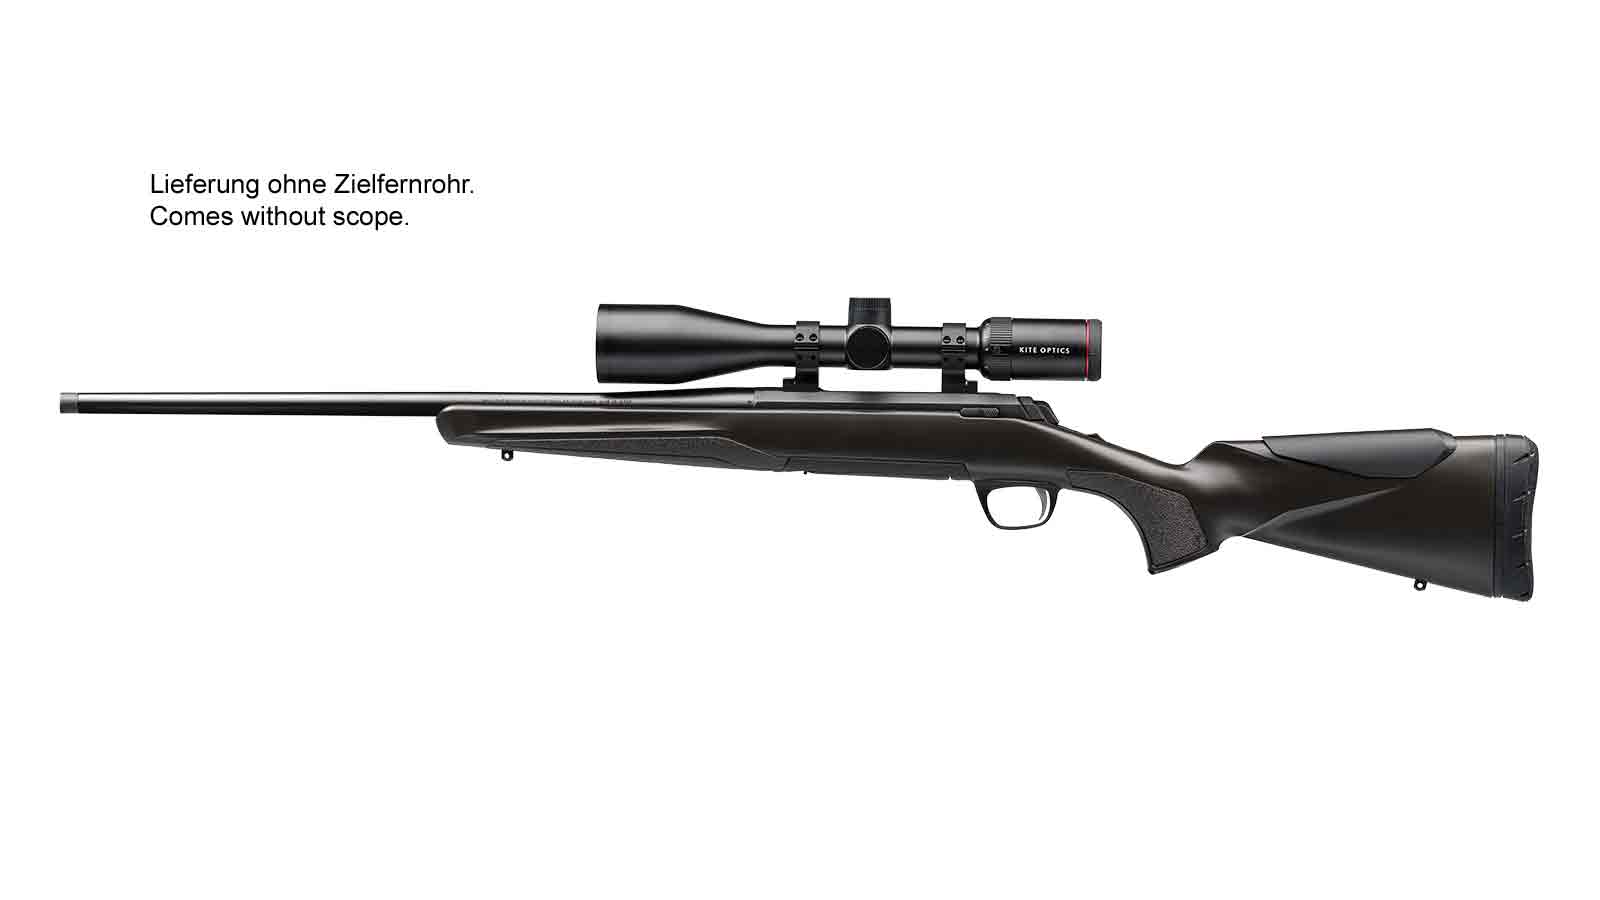 BROWNING X-Bolt Composite Brown HC Adjustable Threaded  .30-